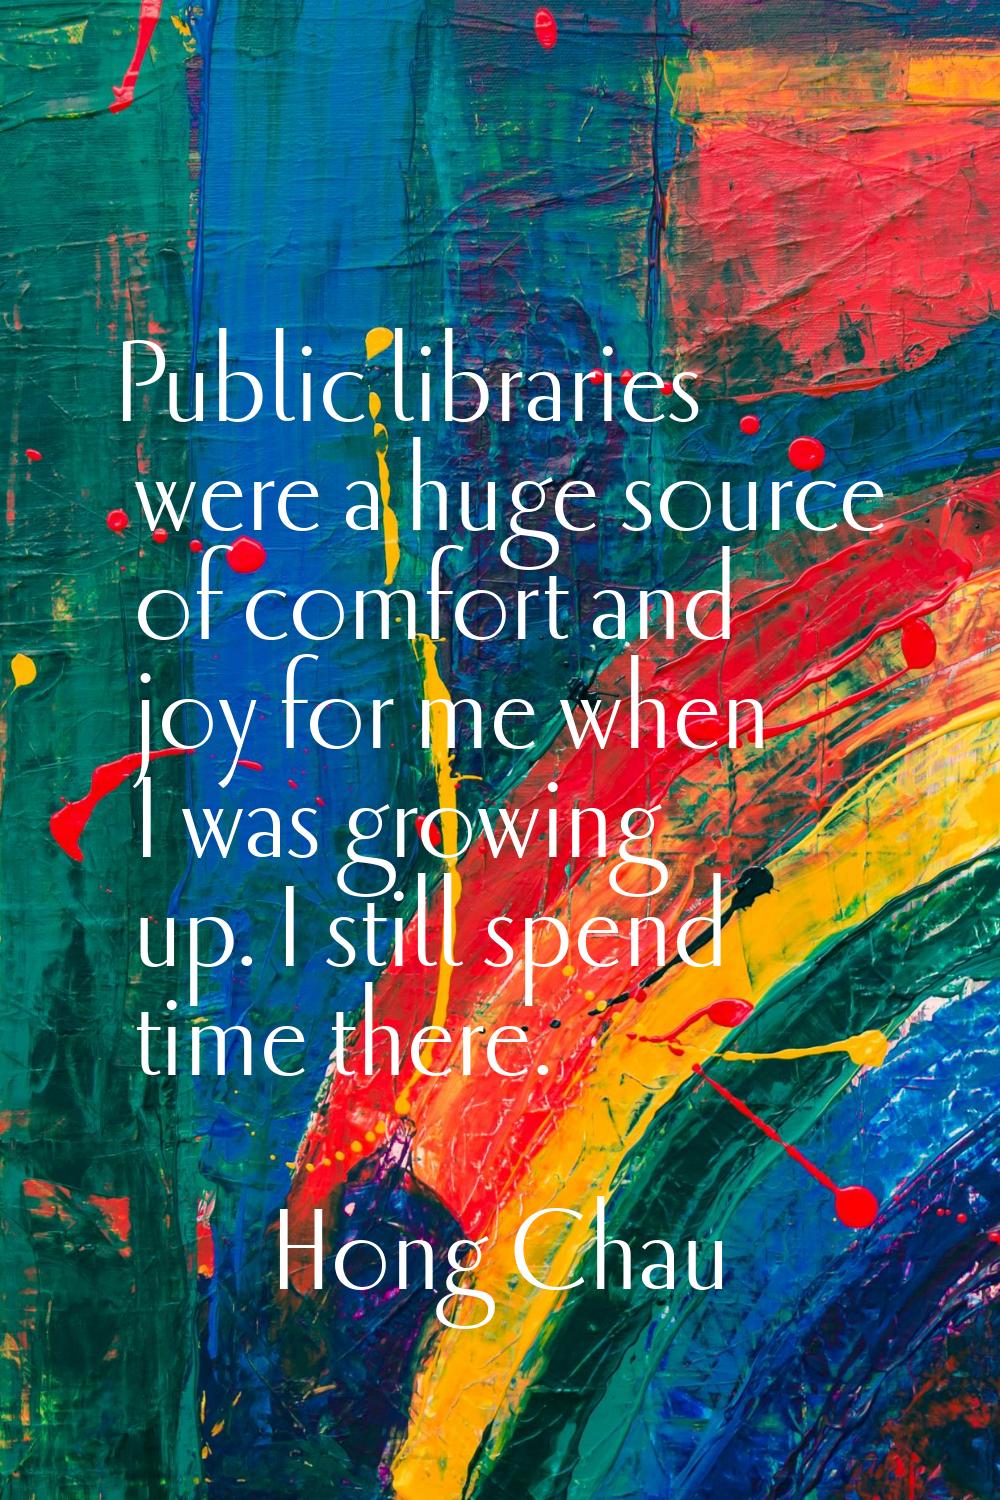 Public libraries were a huge source of comfort and joy for me when I was growing up. I still spend 